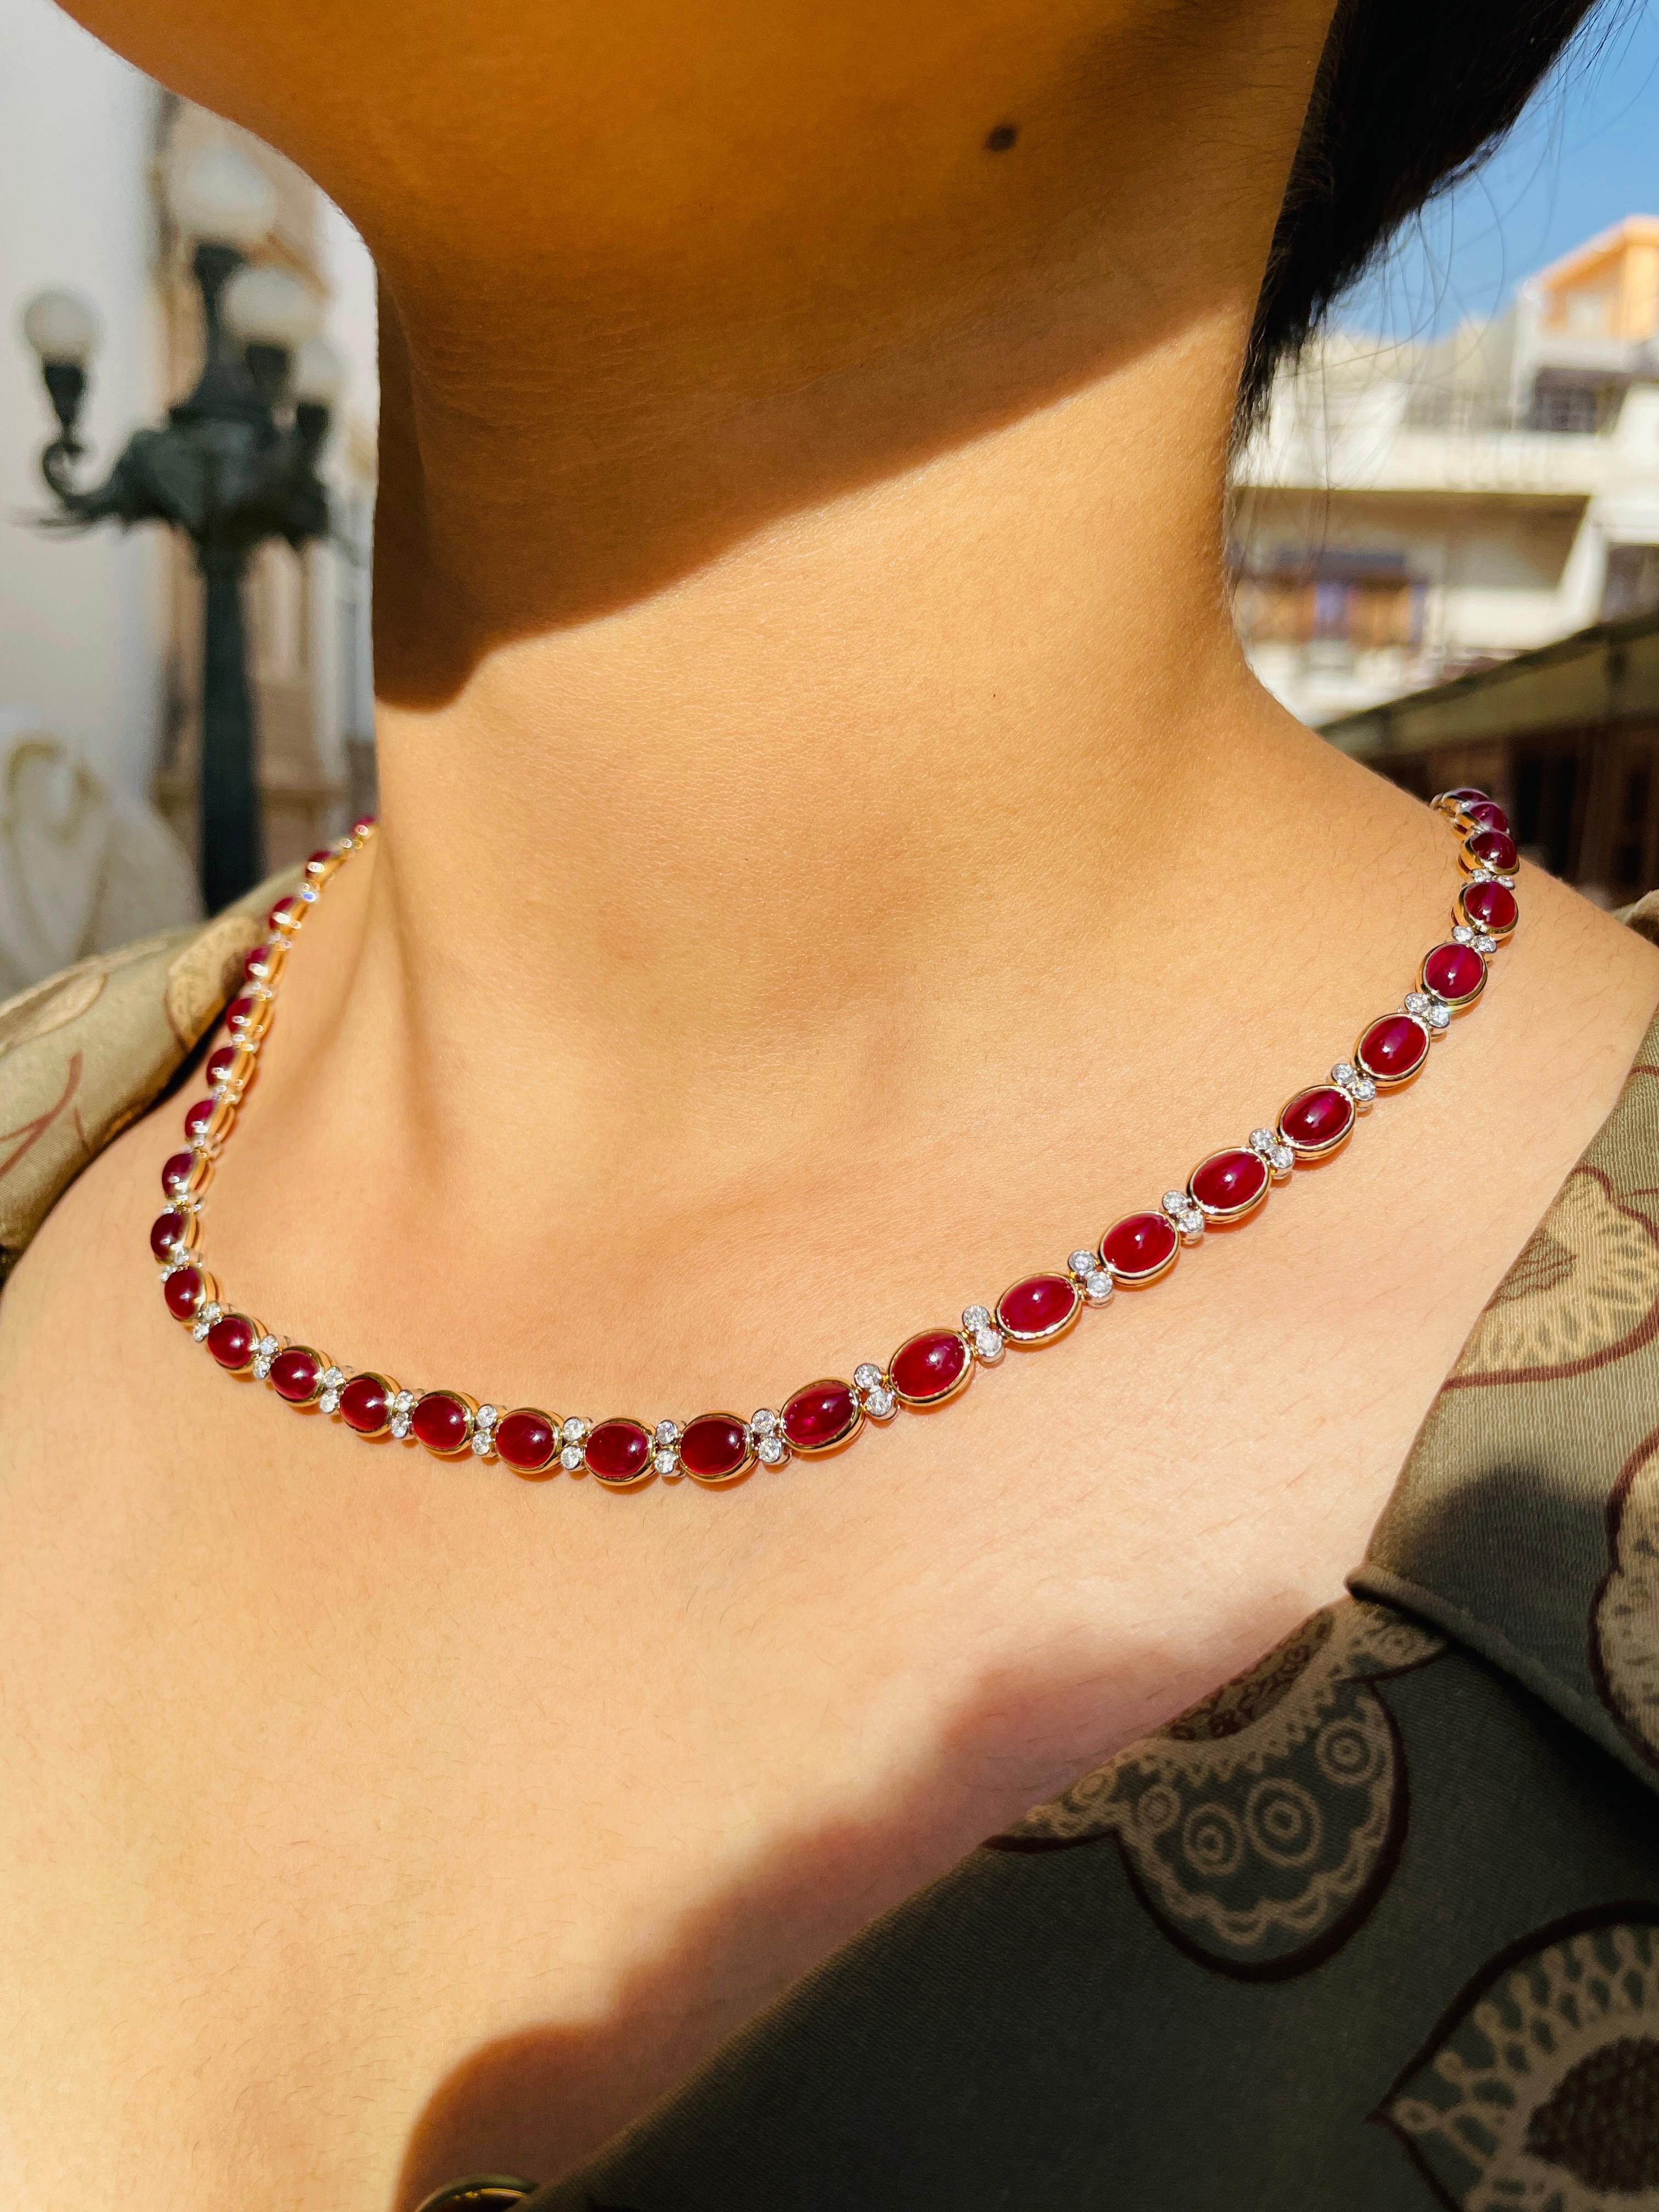 Ruby Necklace in 18K Gold studded with oval cut ruby gemstone pieces and diamonds.
Accessorize your look with this elegant ruby beaded necklace. This stunning piece of jewelry instantly elevates a casual look or dressy outfit. Comfortable and easy